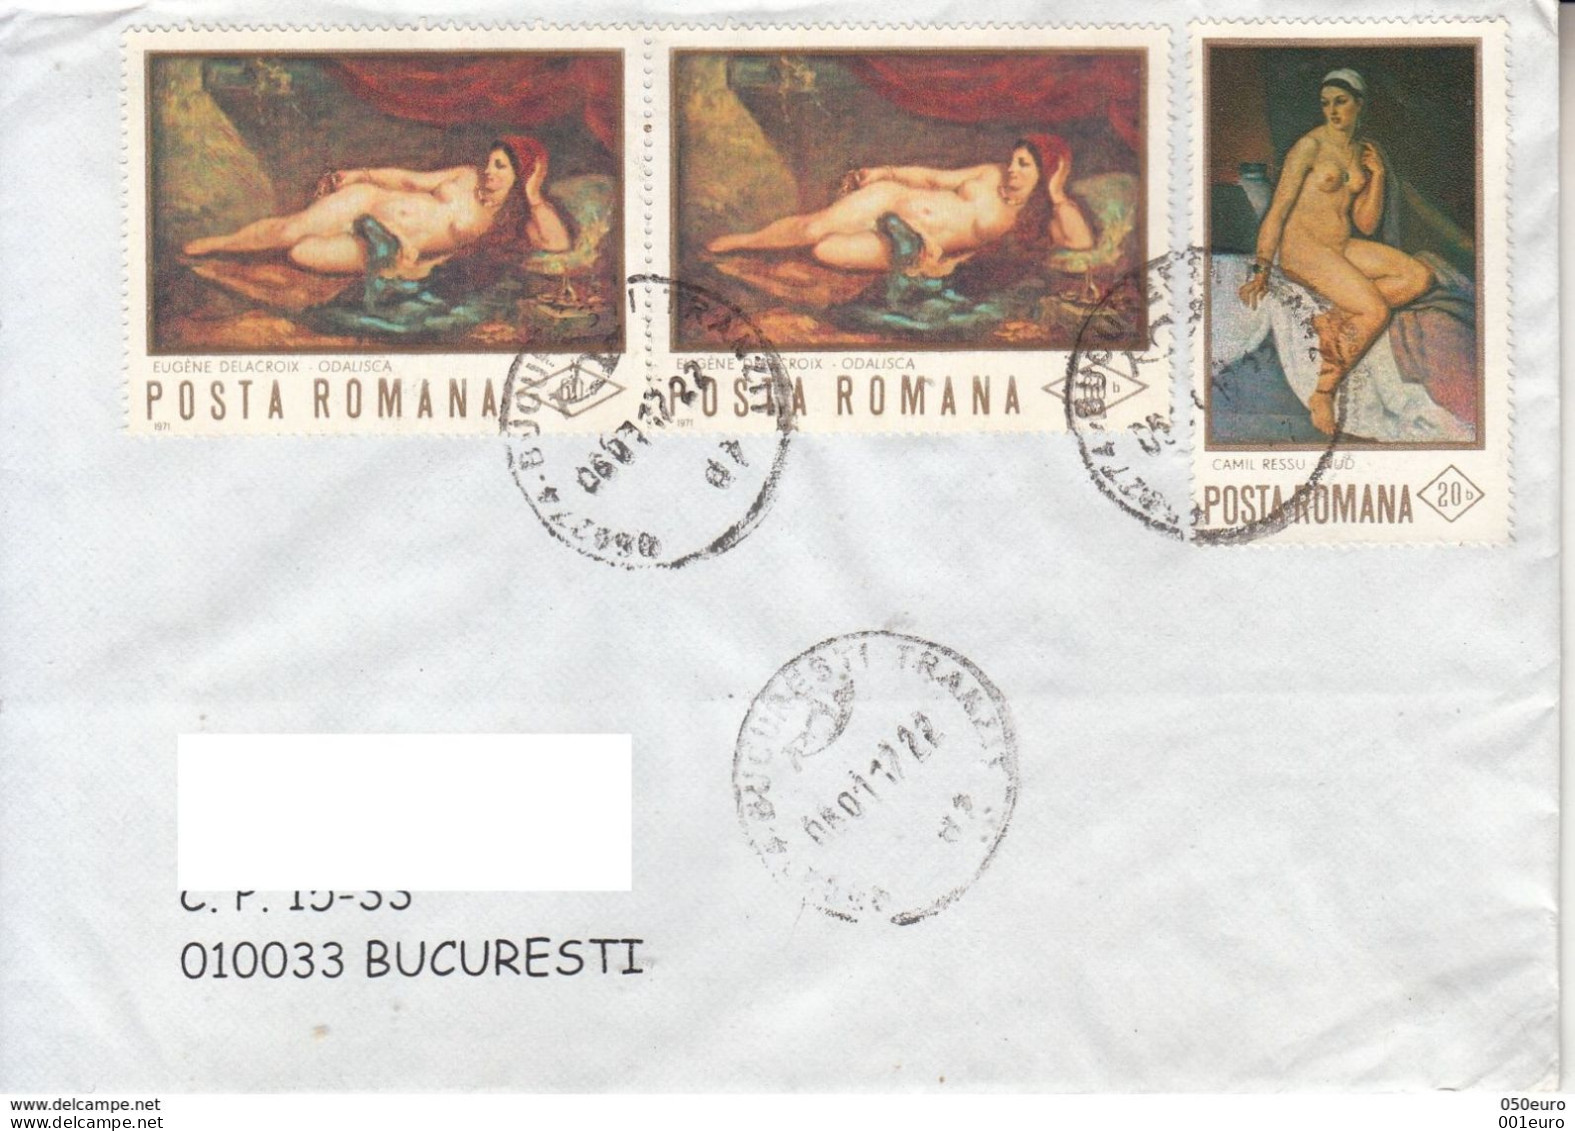 # ROMANIA : Lot Of 4 Covers Circulated As Domestic Letters In Romania #1043364880 - Registered Shipping! - Cartas & Documentos